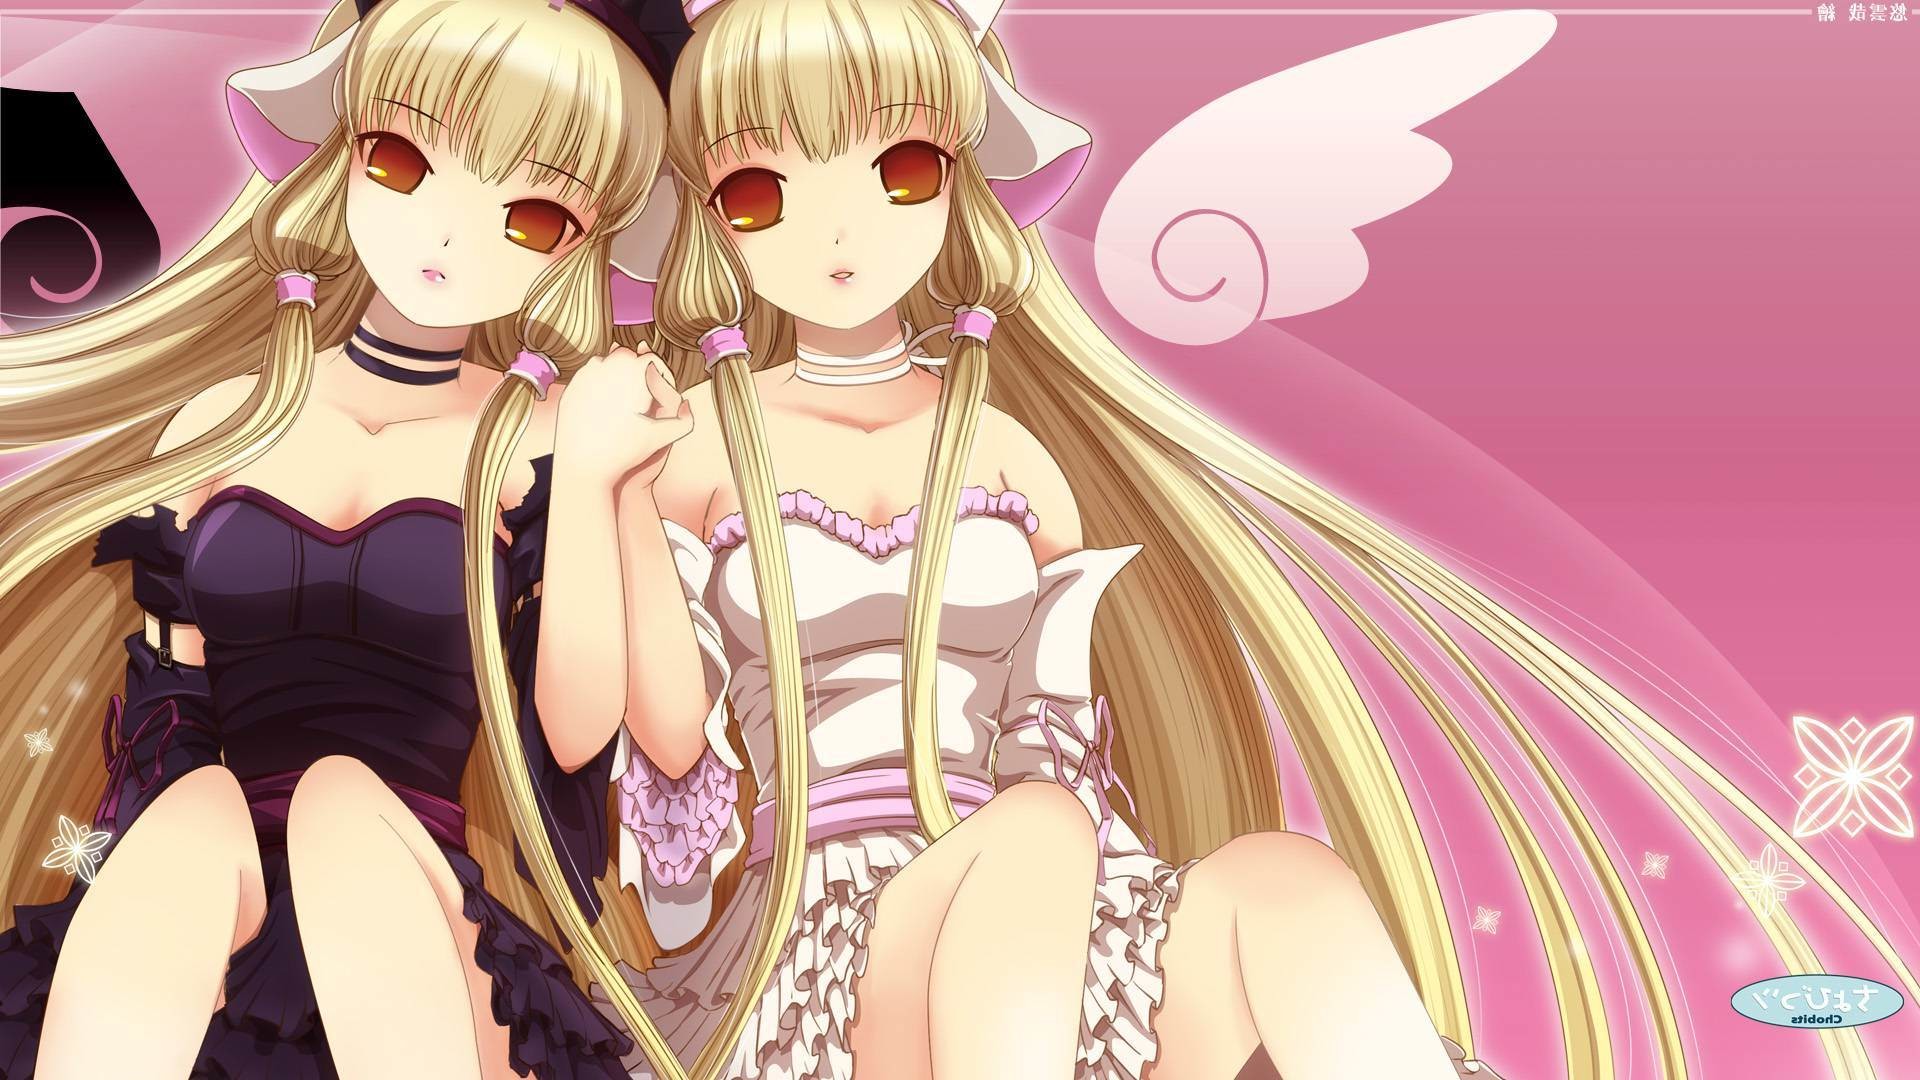 1920x1080 Chobits Background Free Download Chobits Background Full HD